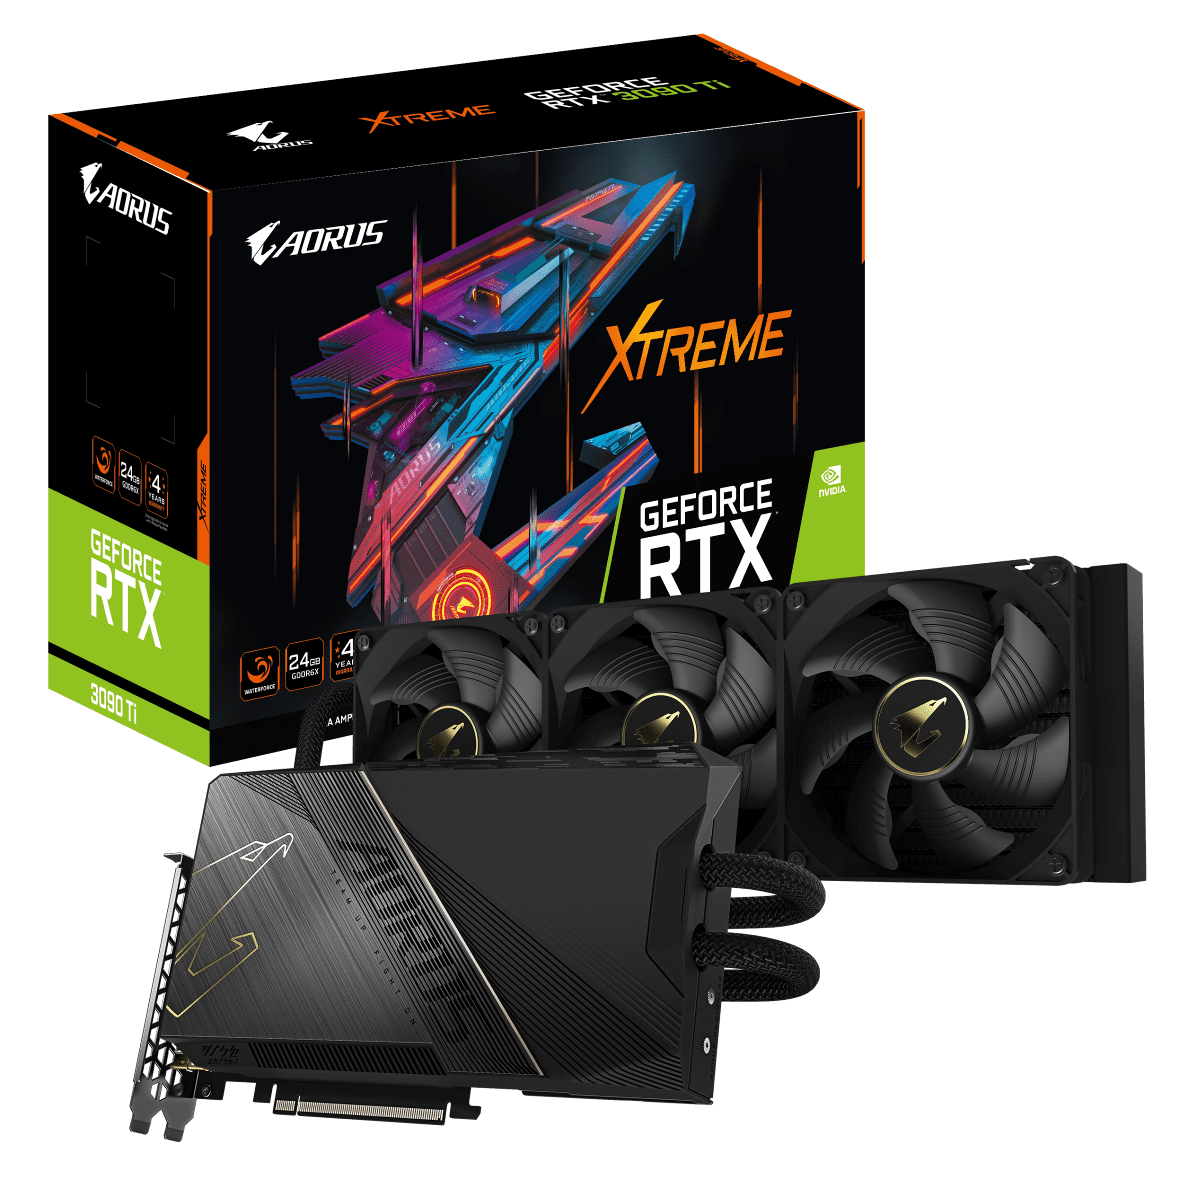 GIGABYTE: here is the new series of video cards